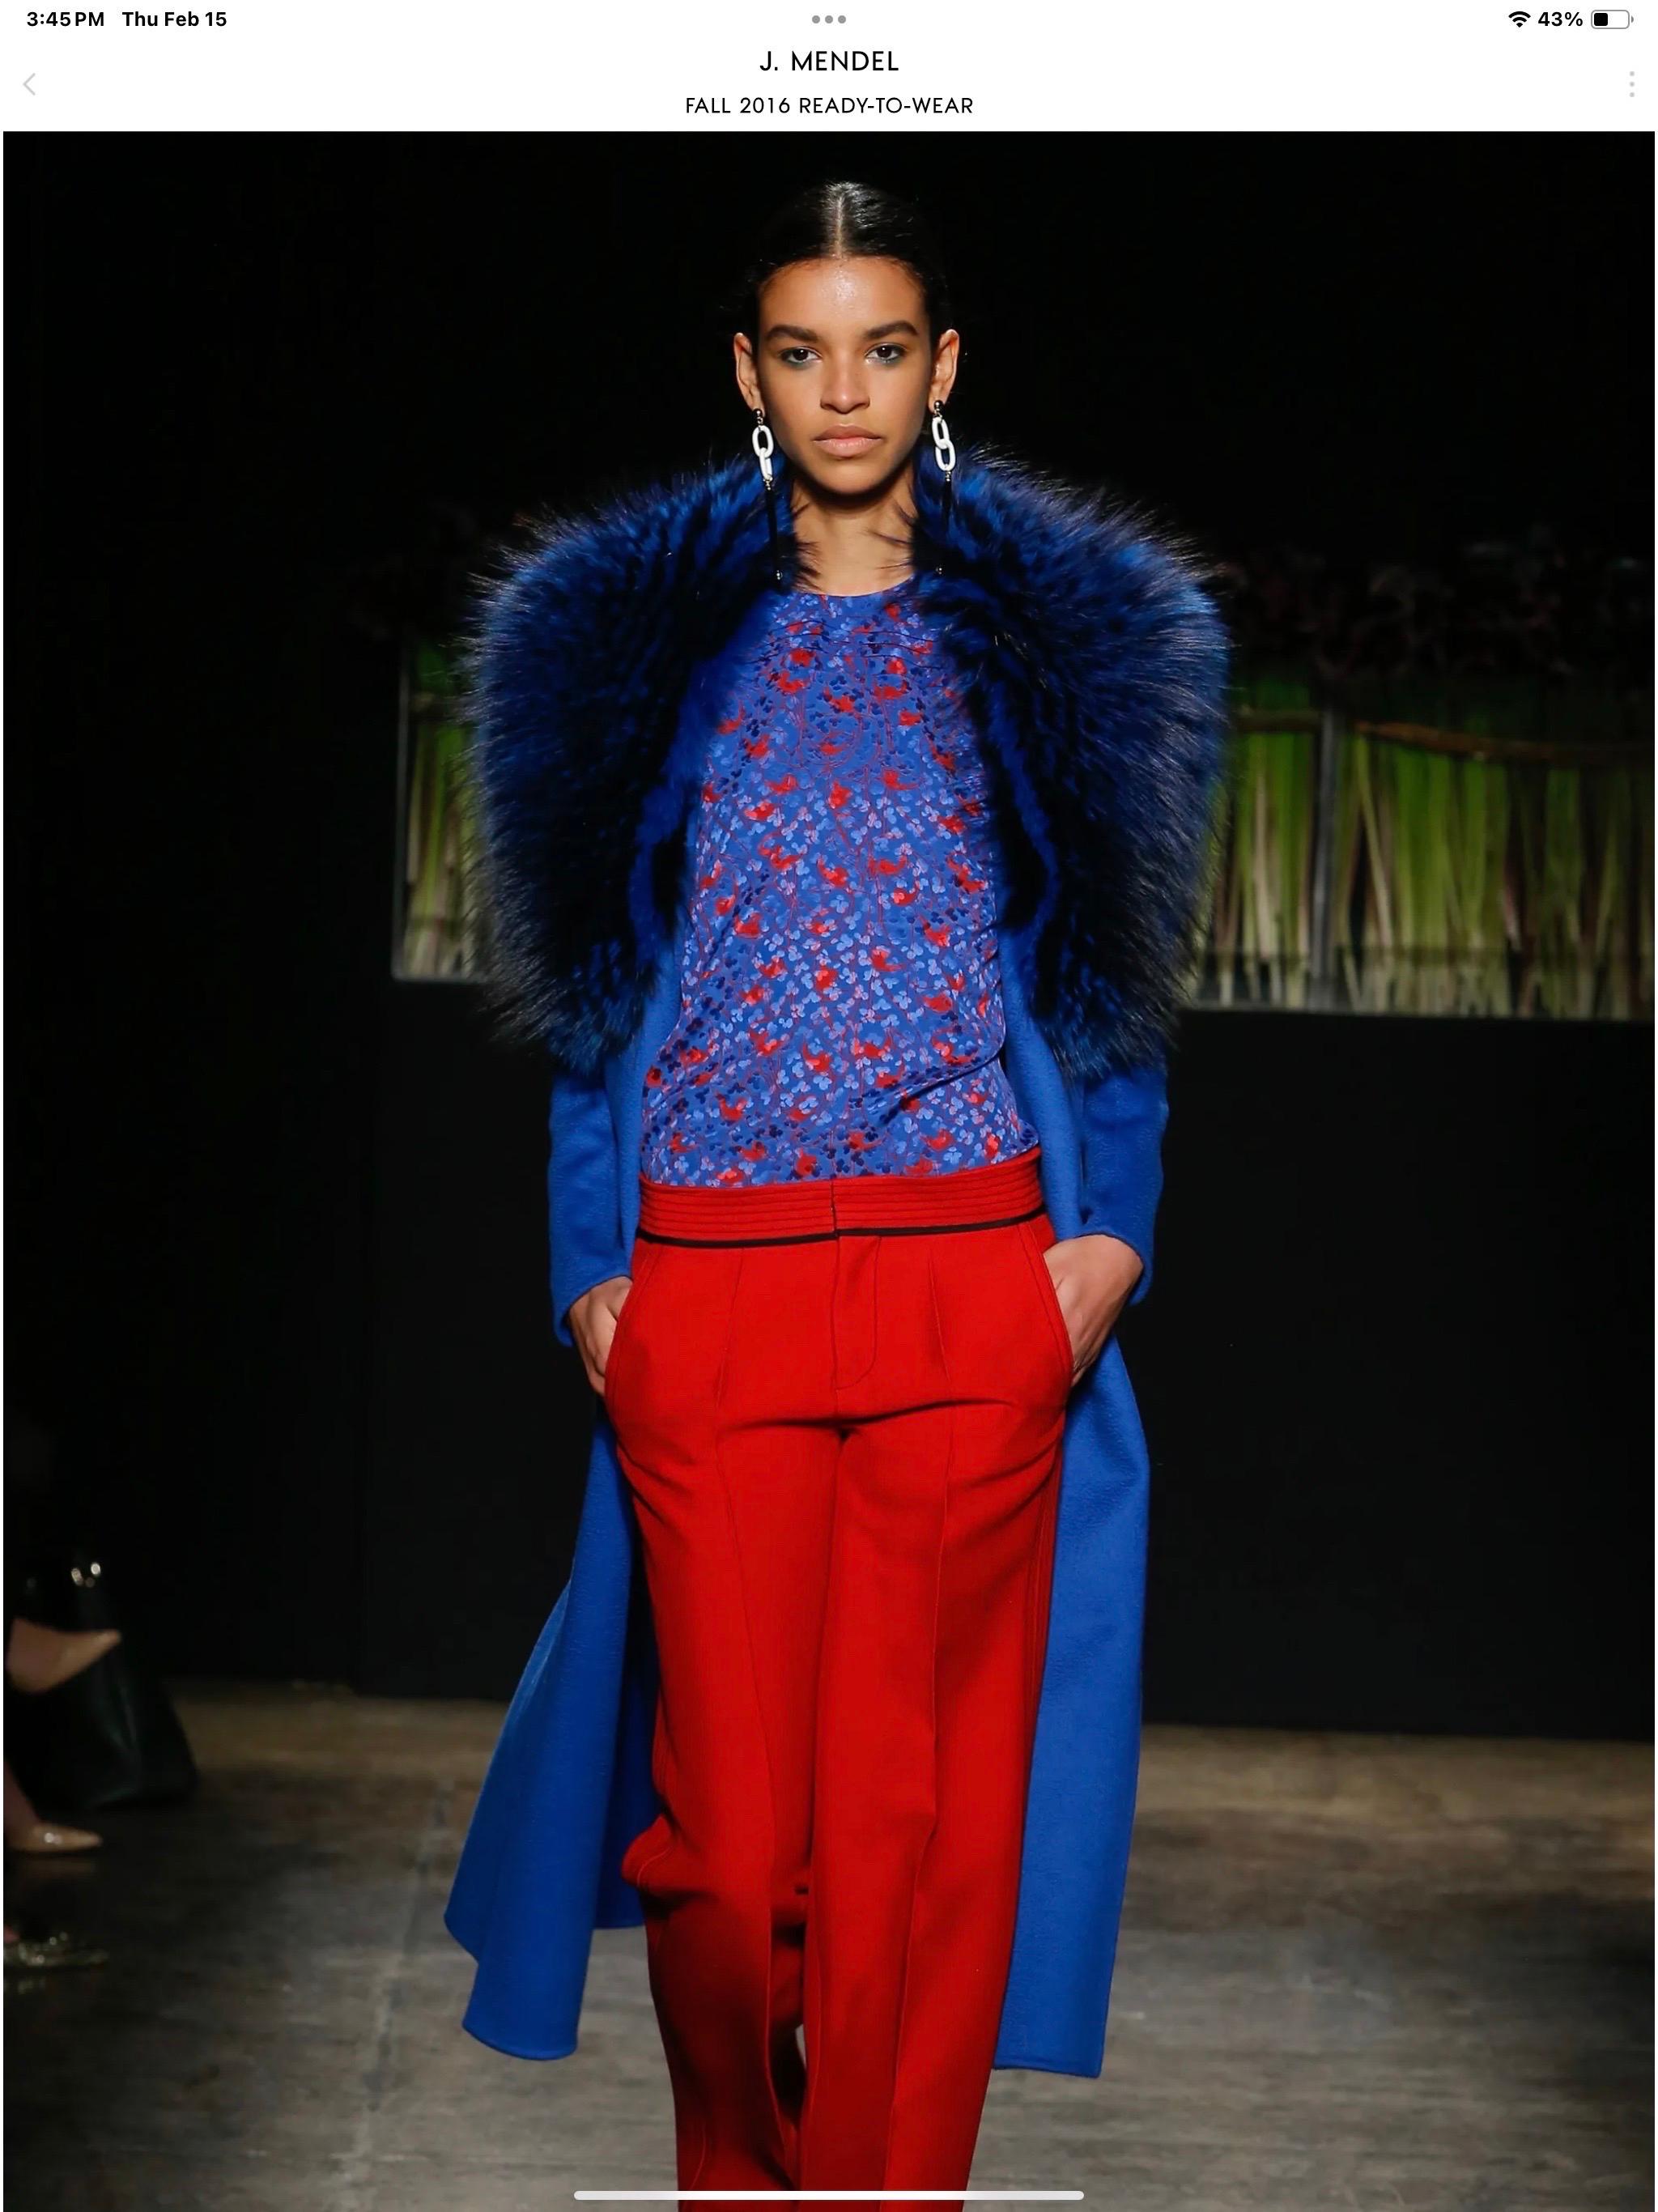 J Mendel Runway Fall 2016 Azure Cashmere Coat with Fox Fur Collar-Size Small-NWT This stunning J Mendel Coat was look #9 of the Fall 2016 Fashion Show. This coat is new with tags and is made of a double faced zibeline cashmere with a dyed blue